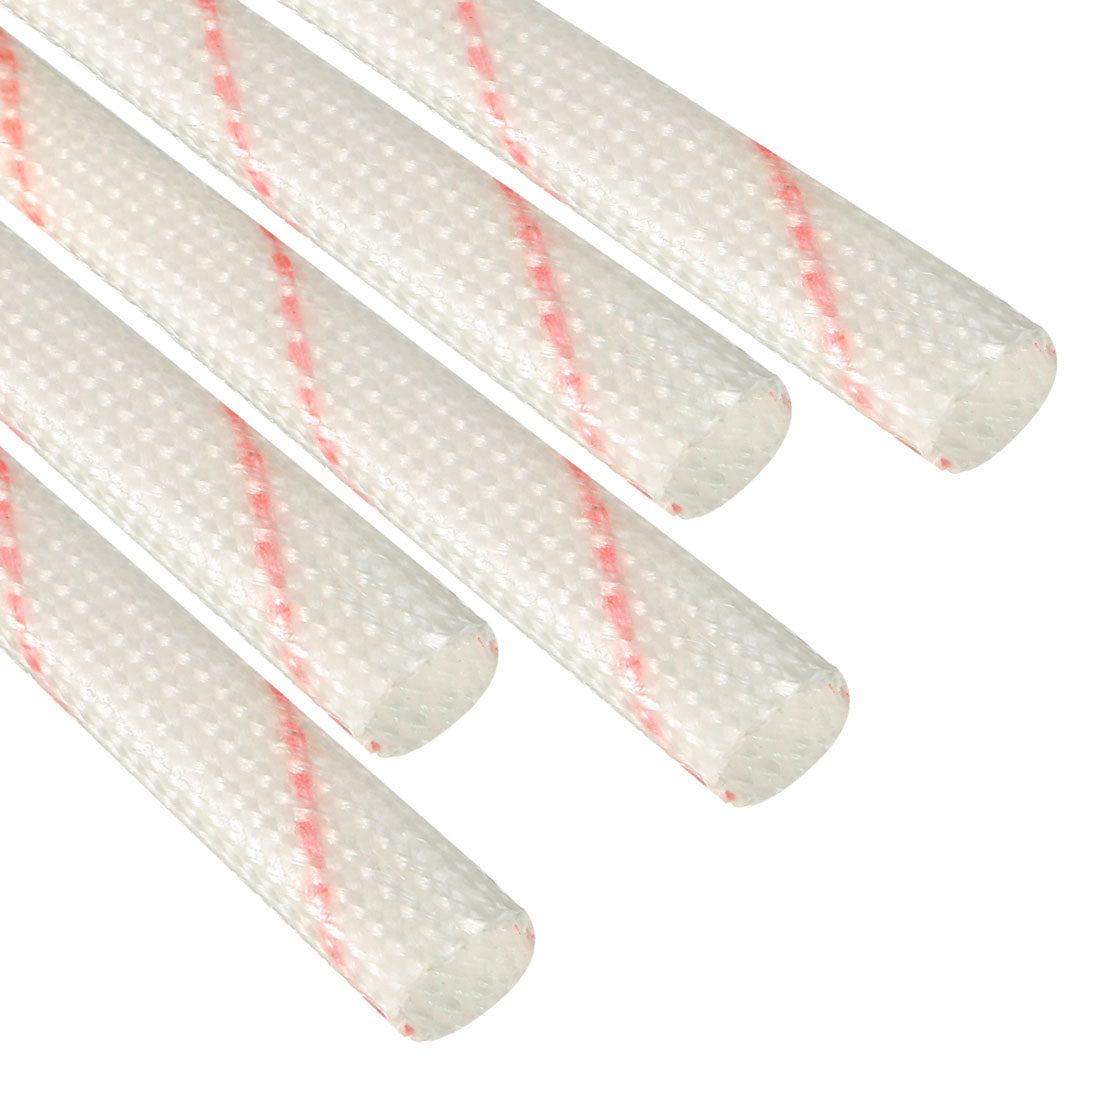 uxcell Uxcell Fiberglass Sleeve 6mm I.D. PVC Insulation Tubing 1500V Tube Adjustable Sleeving Pipe 125 Degree Centigrade Cable Wrap Wire 900mm 2.95ft 5Pcs